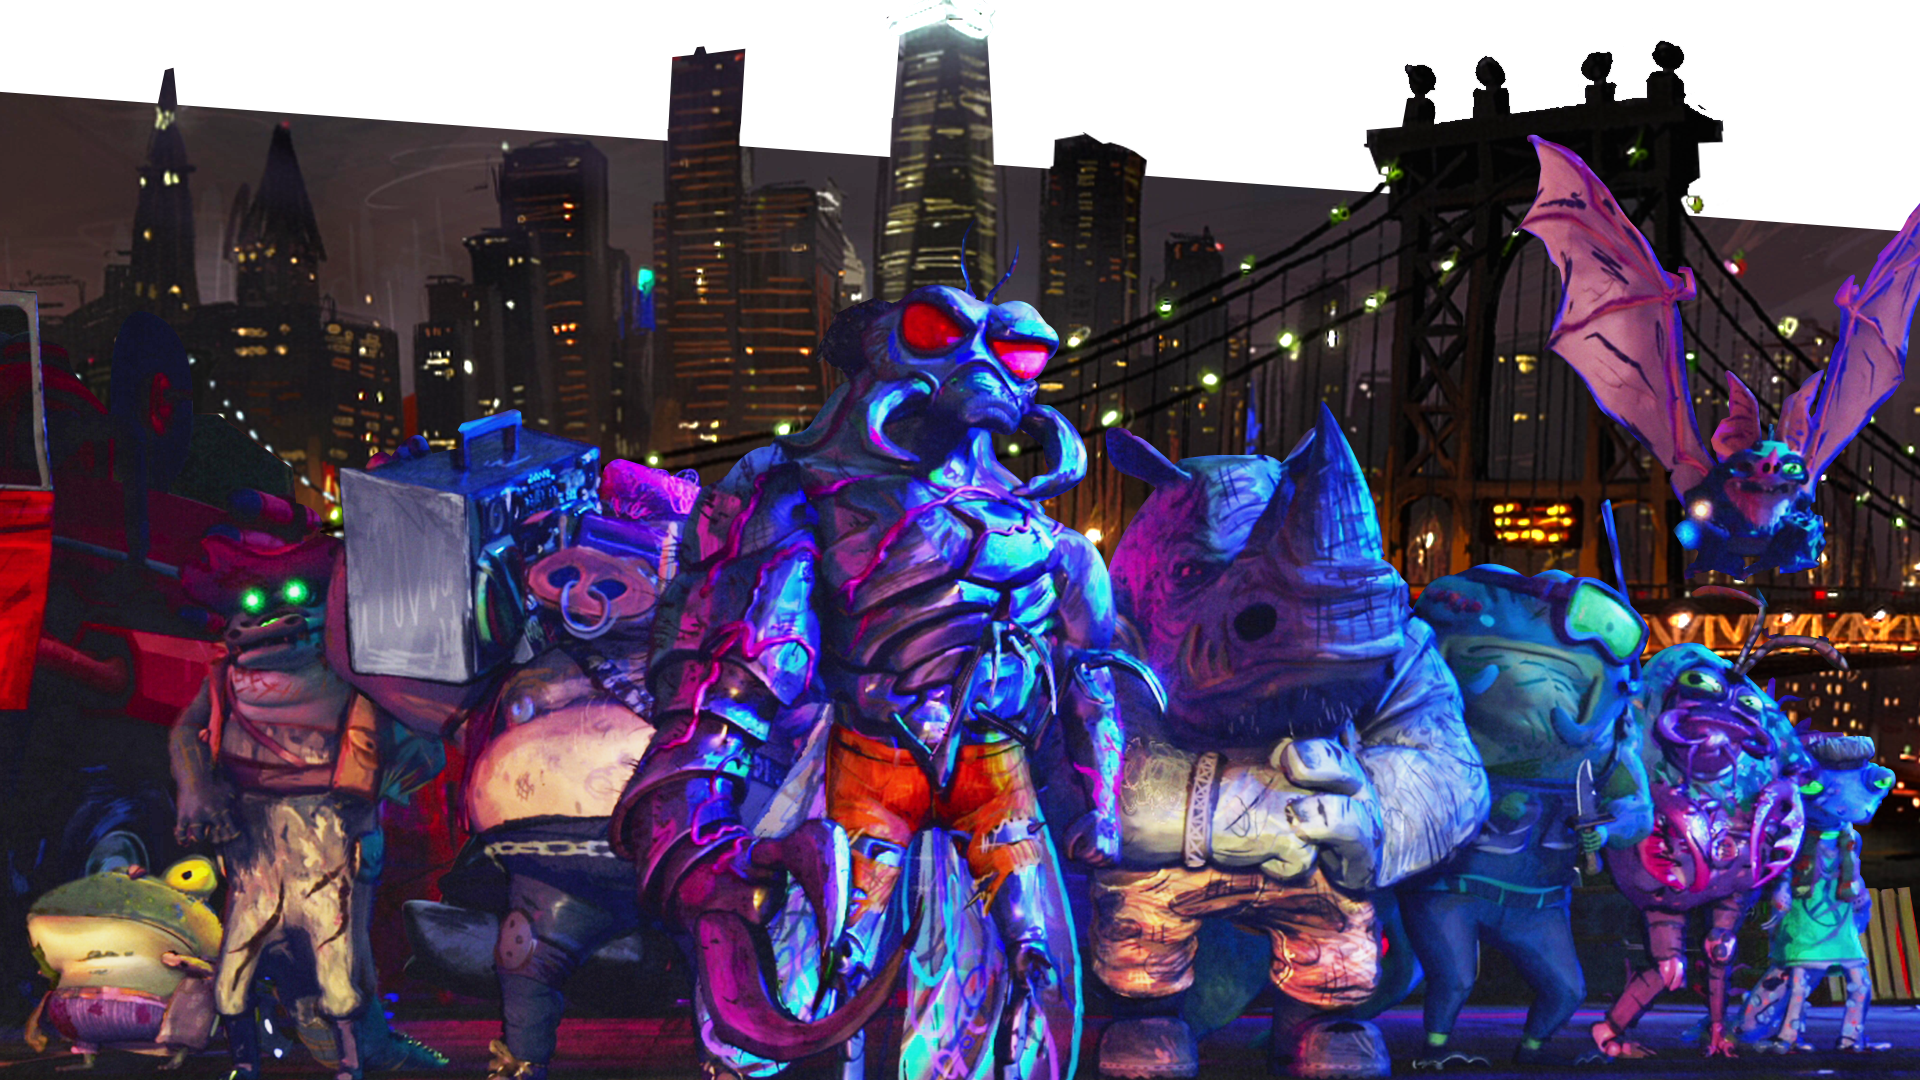 The villains of the new Mutant Mayhem movie pose in front of the New York City skyline at night. Gengis Frog, Bebop, Superfly, Rocksteady, Ray Fillet, Mondo Gecko, and Leatherhead. 